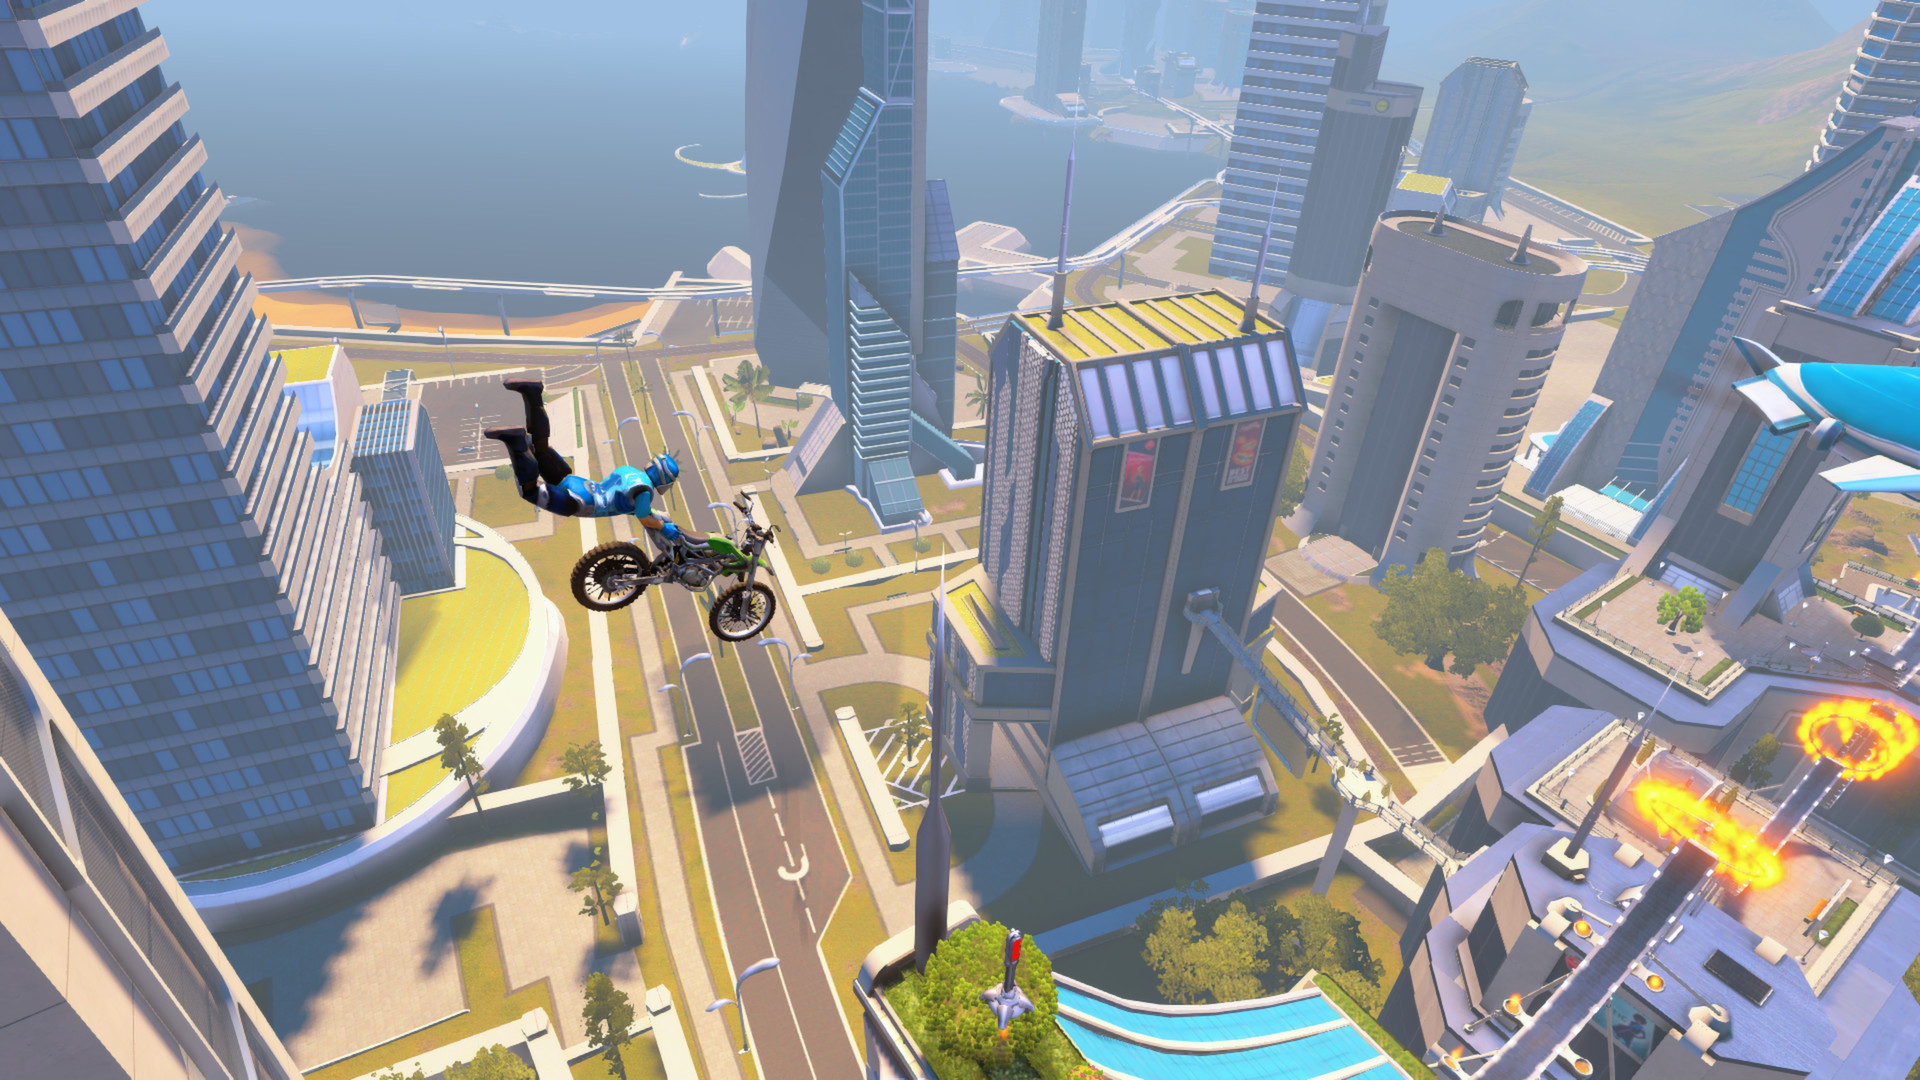 trials fusion game ps4